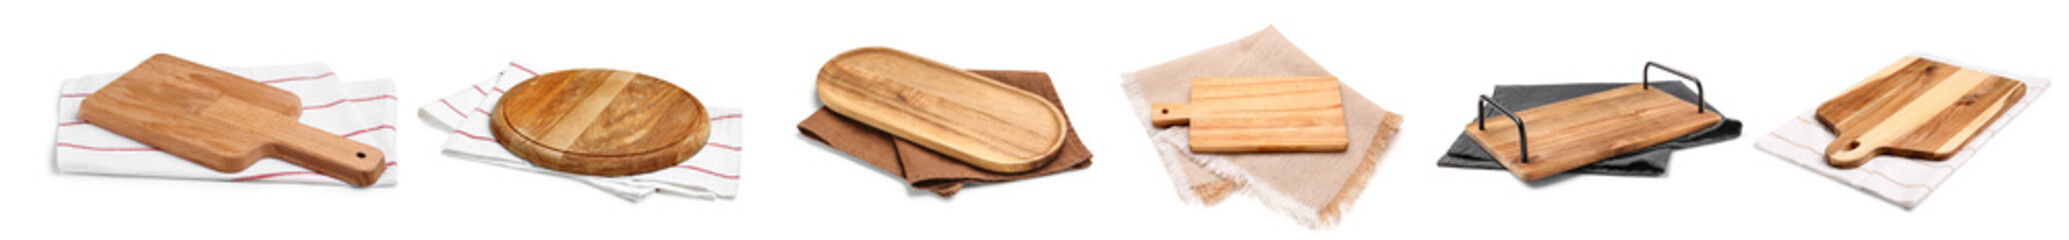 Set of wooden boards with napkins on white background